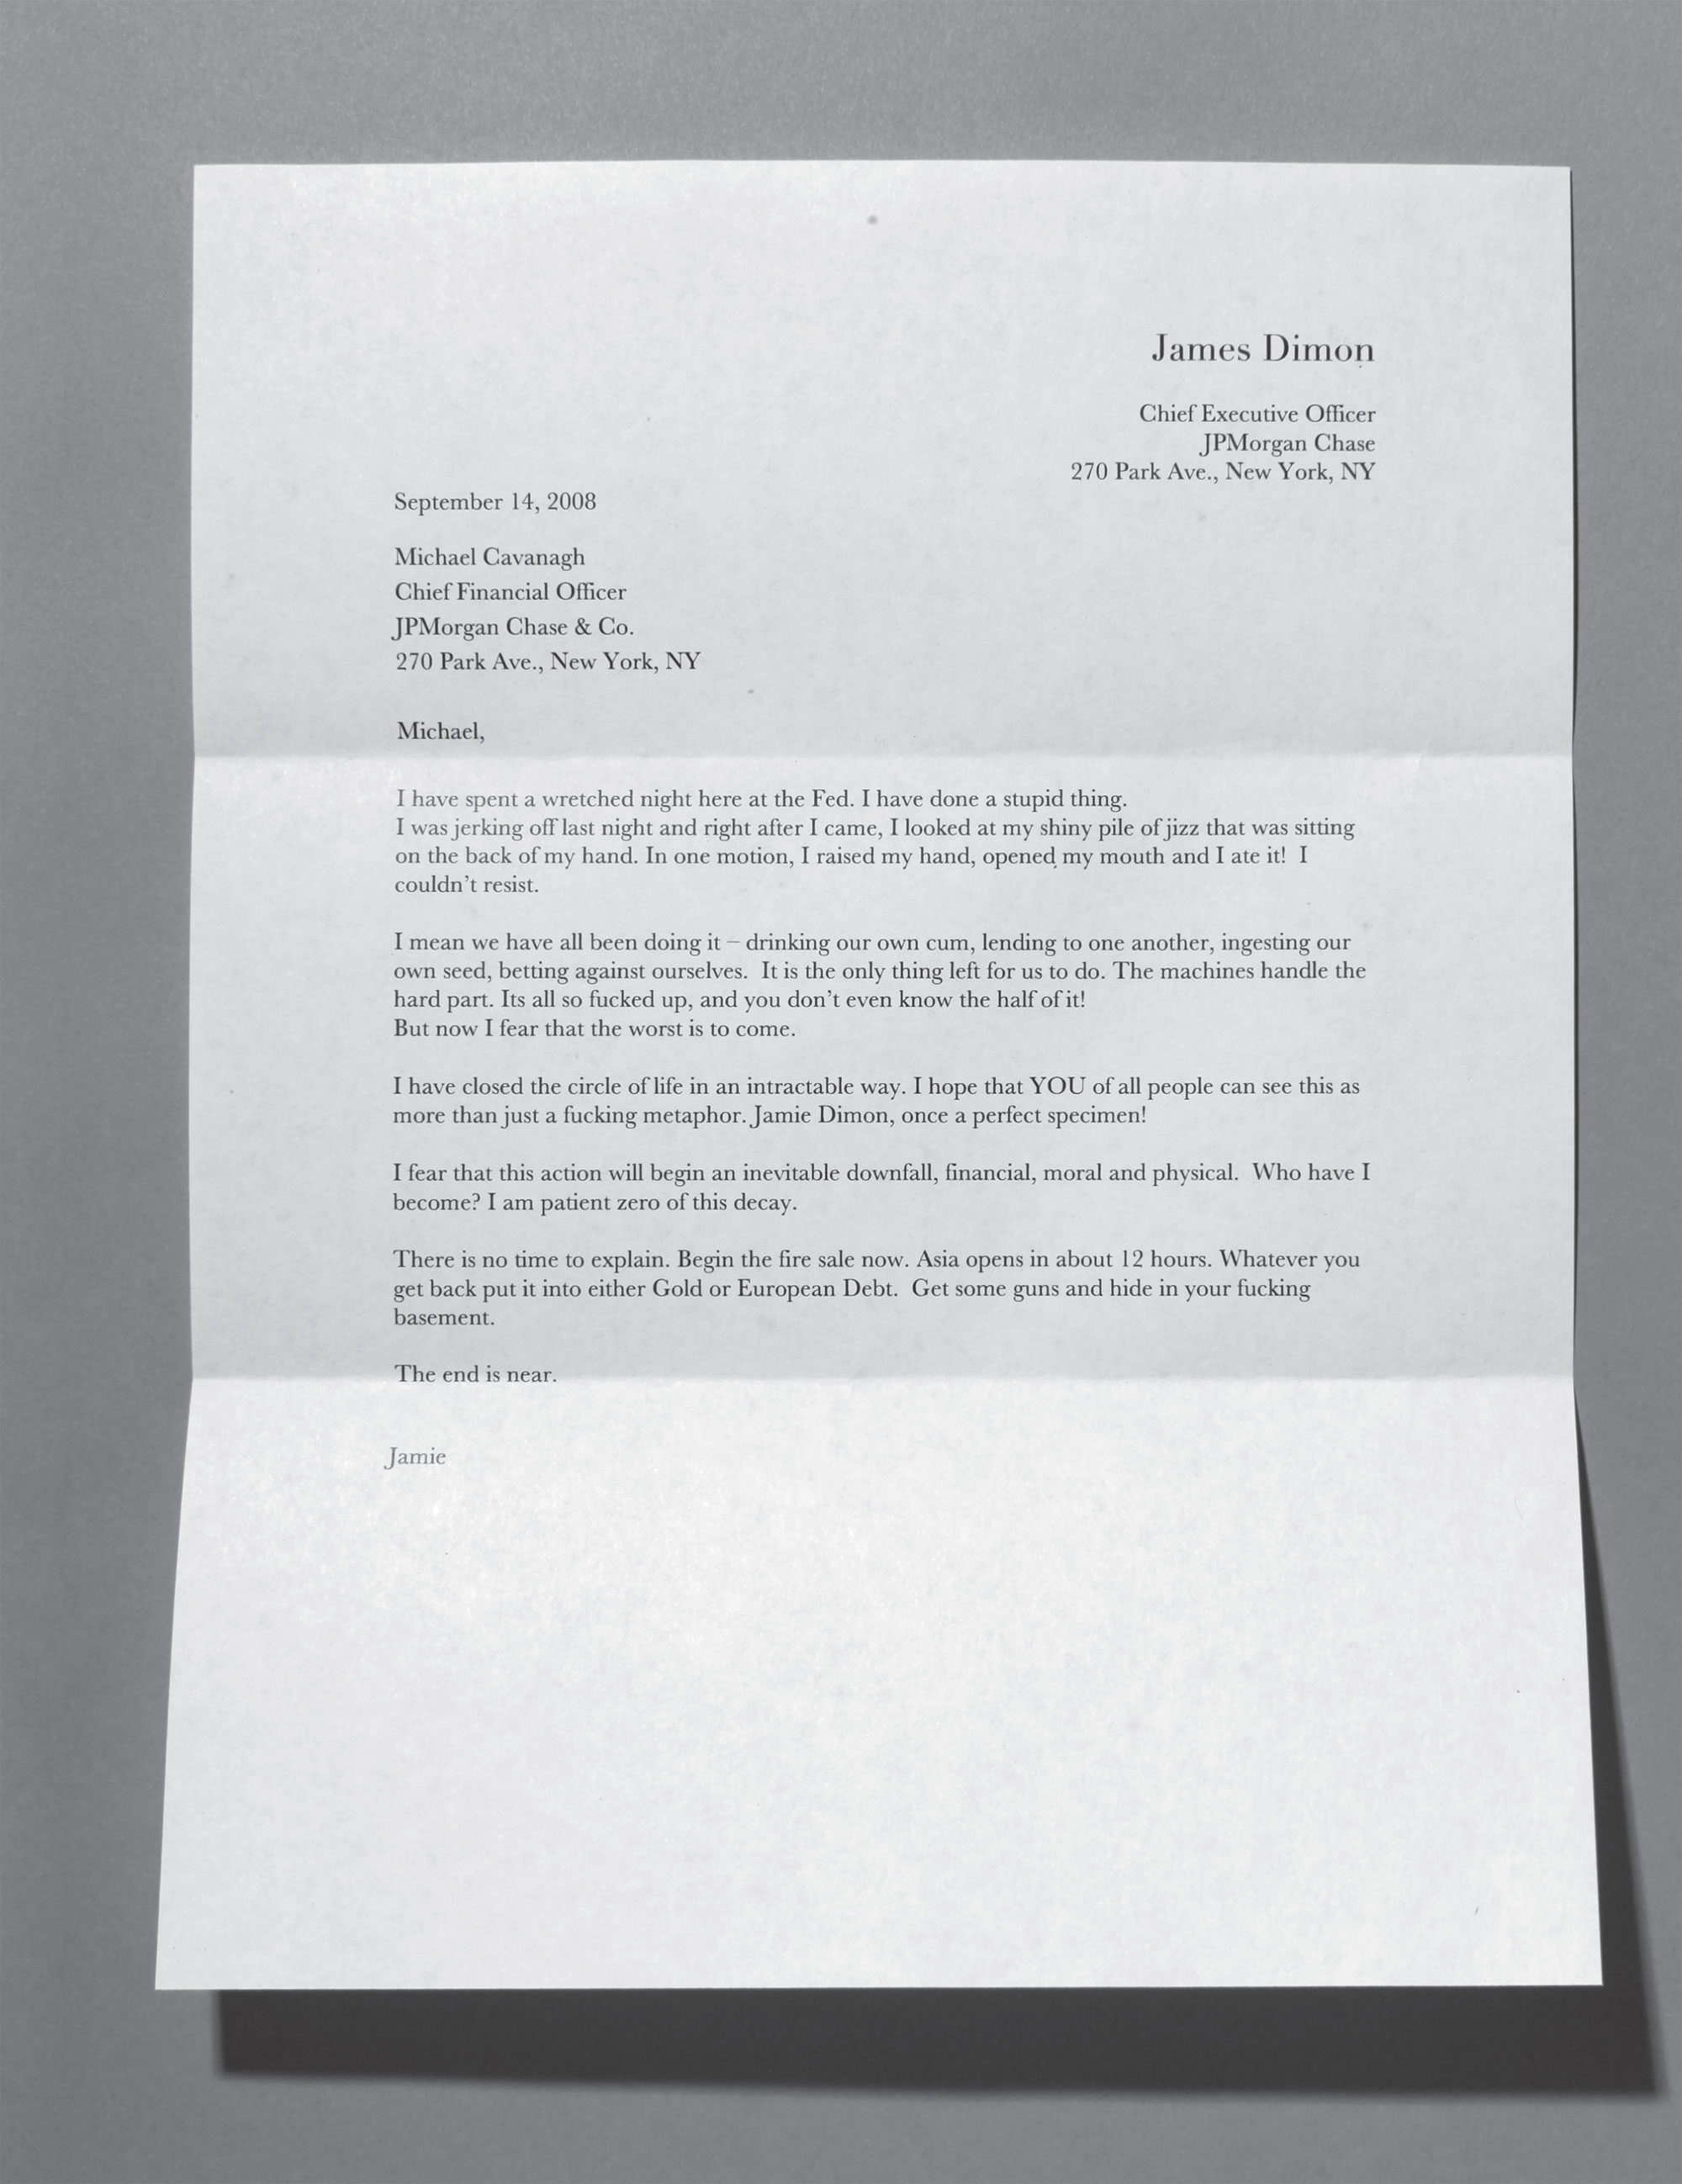 Imagining CEO Jamie Dimon's Love Letters VICE